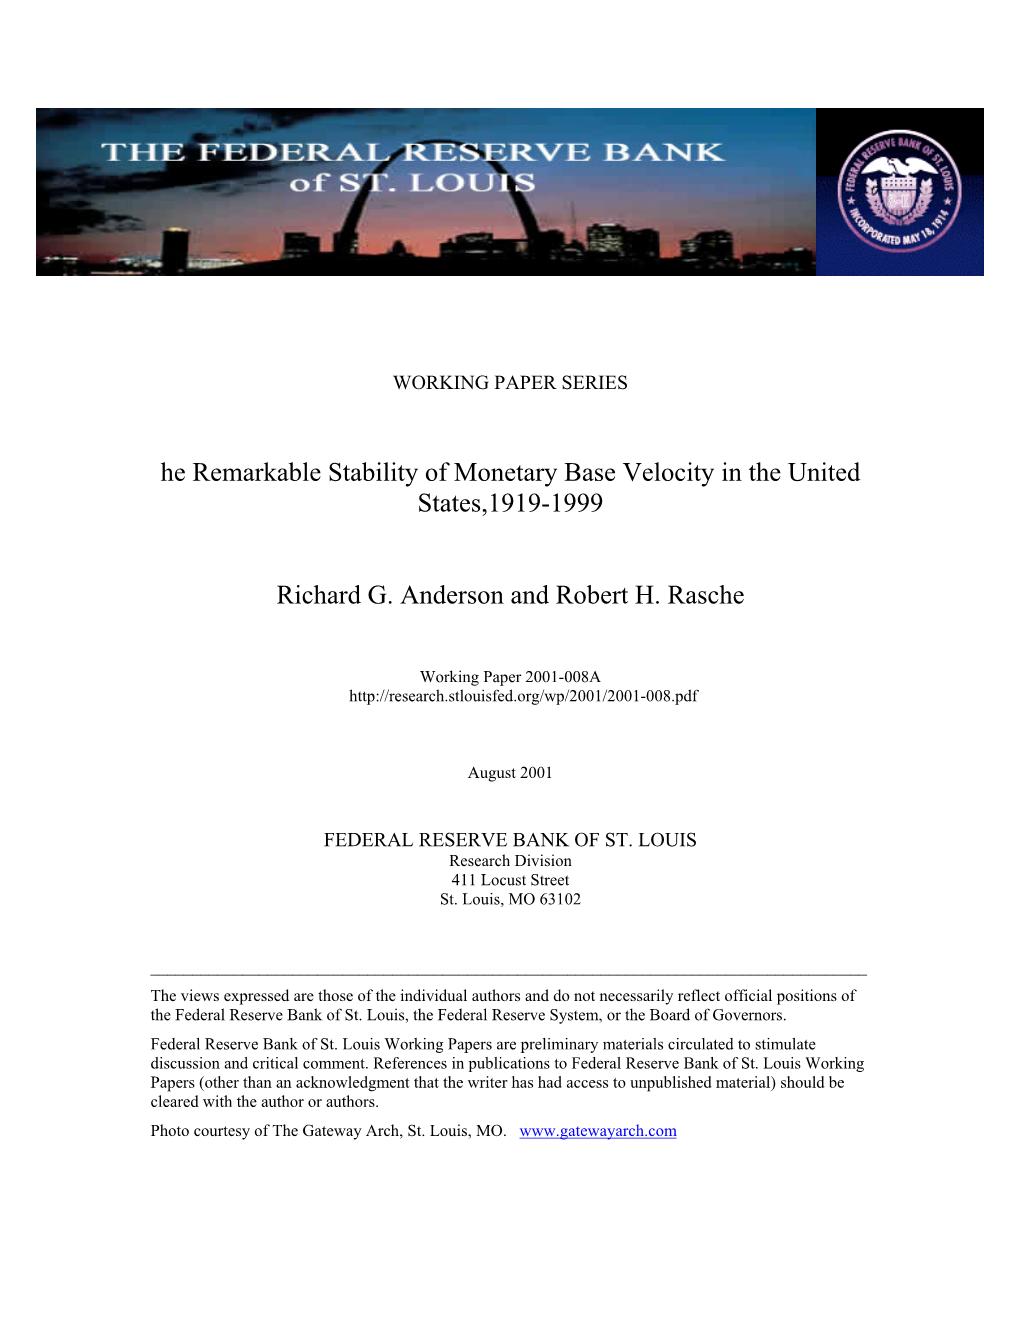 The Remarkable Stability of Monetary Base Velocity in the United States, 1919-1999